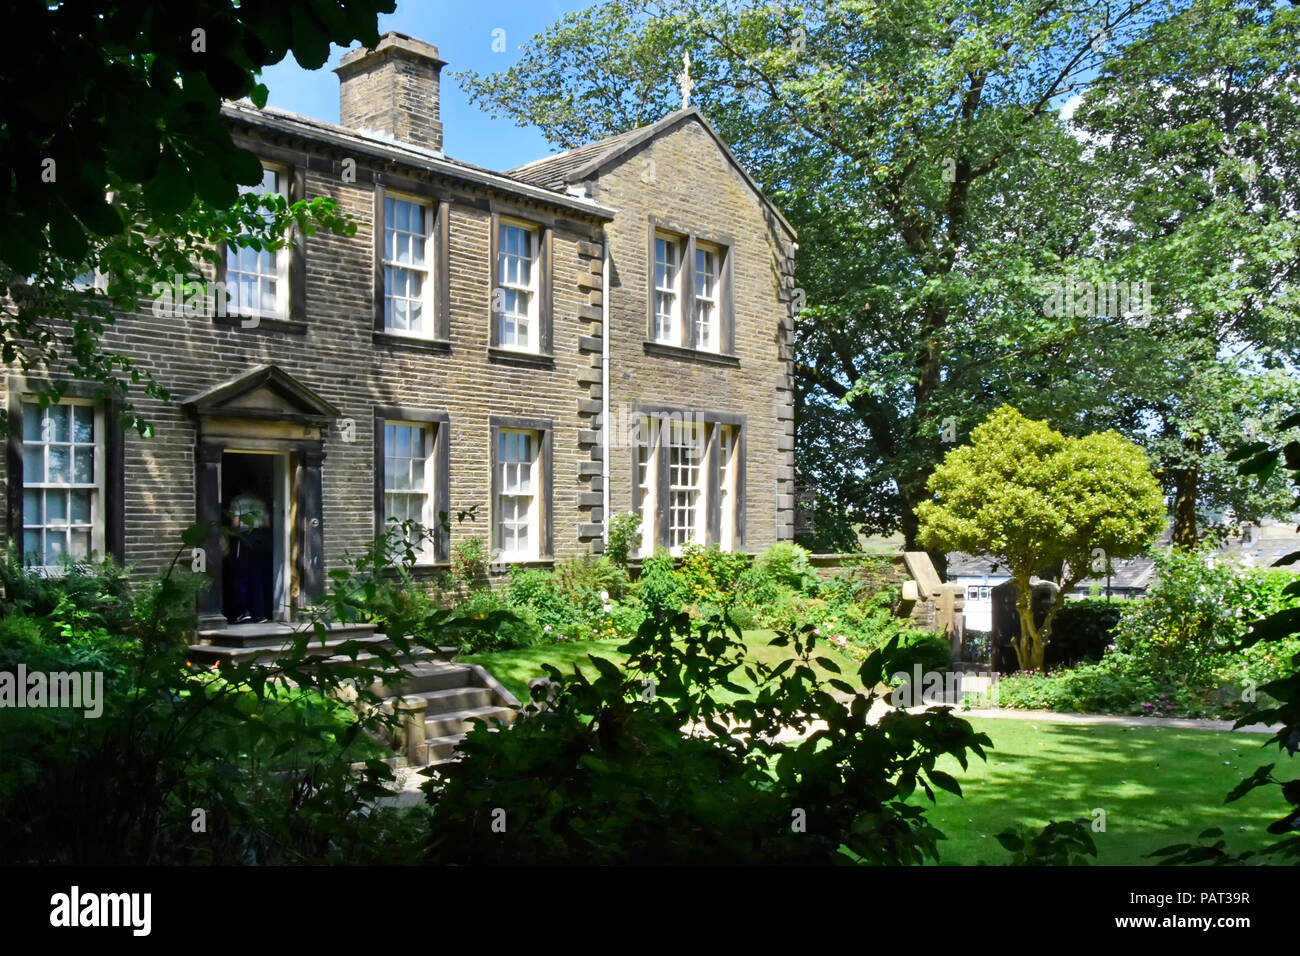 Bronte sisters family home & garden now the Brontes Parsonage Museum supporting a major tourism attraction to the Haworth village & West Yorkshire UK Stock Photo